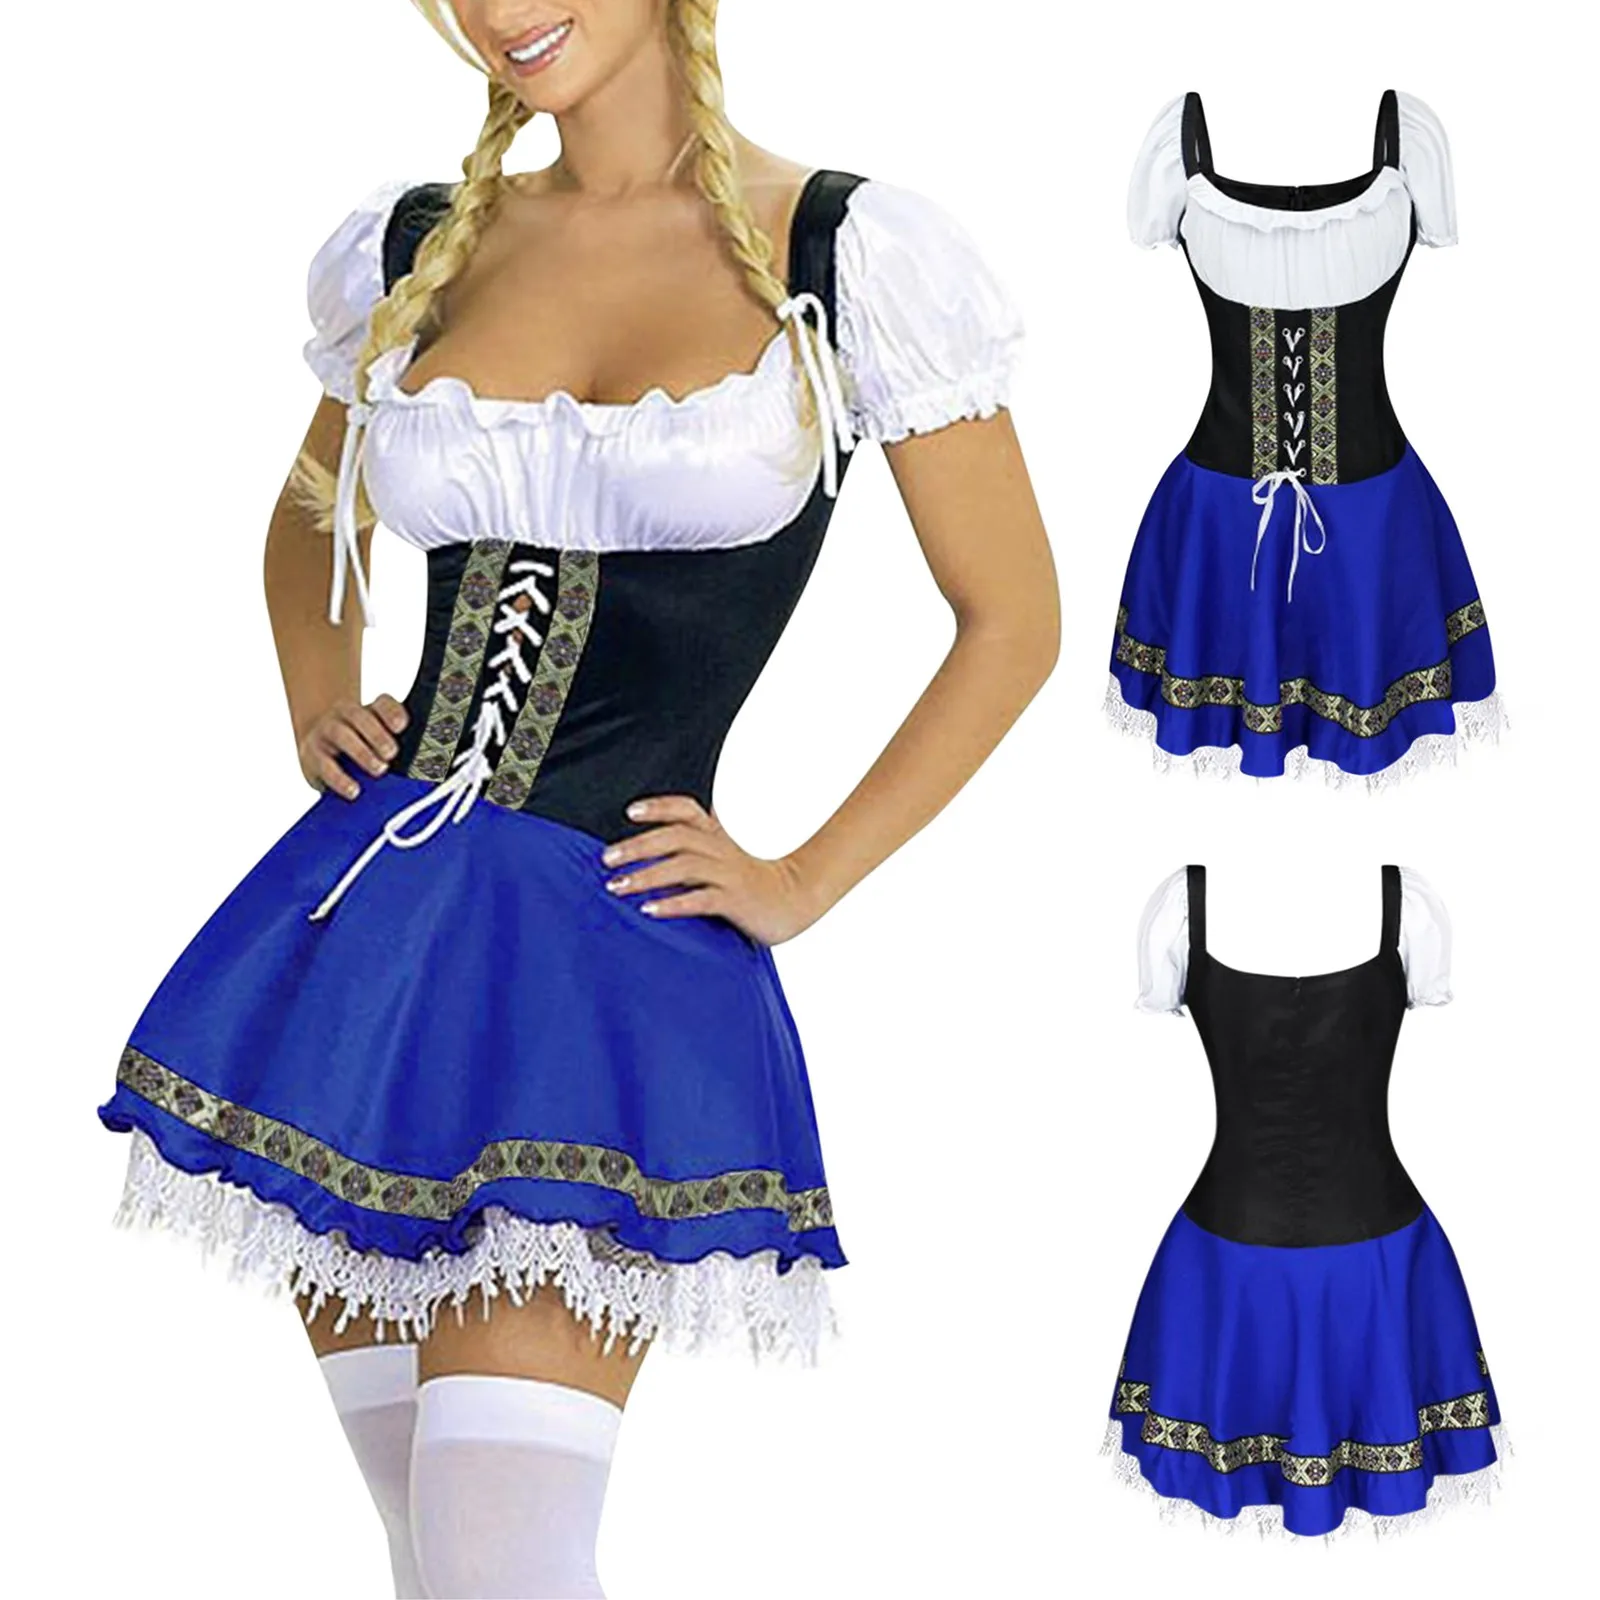 

Costume Oktoberfest Dirndl Costume Tavern Wench Waitress Maid Bar Outfit Cosplay Costumes Halloween Fancy Party Dress Women